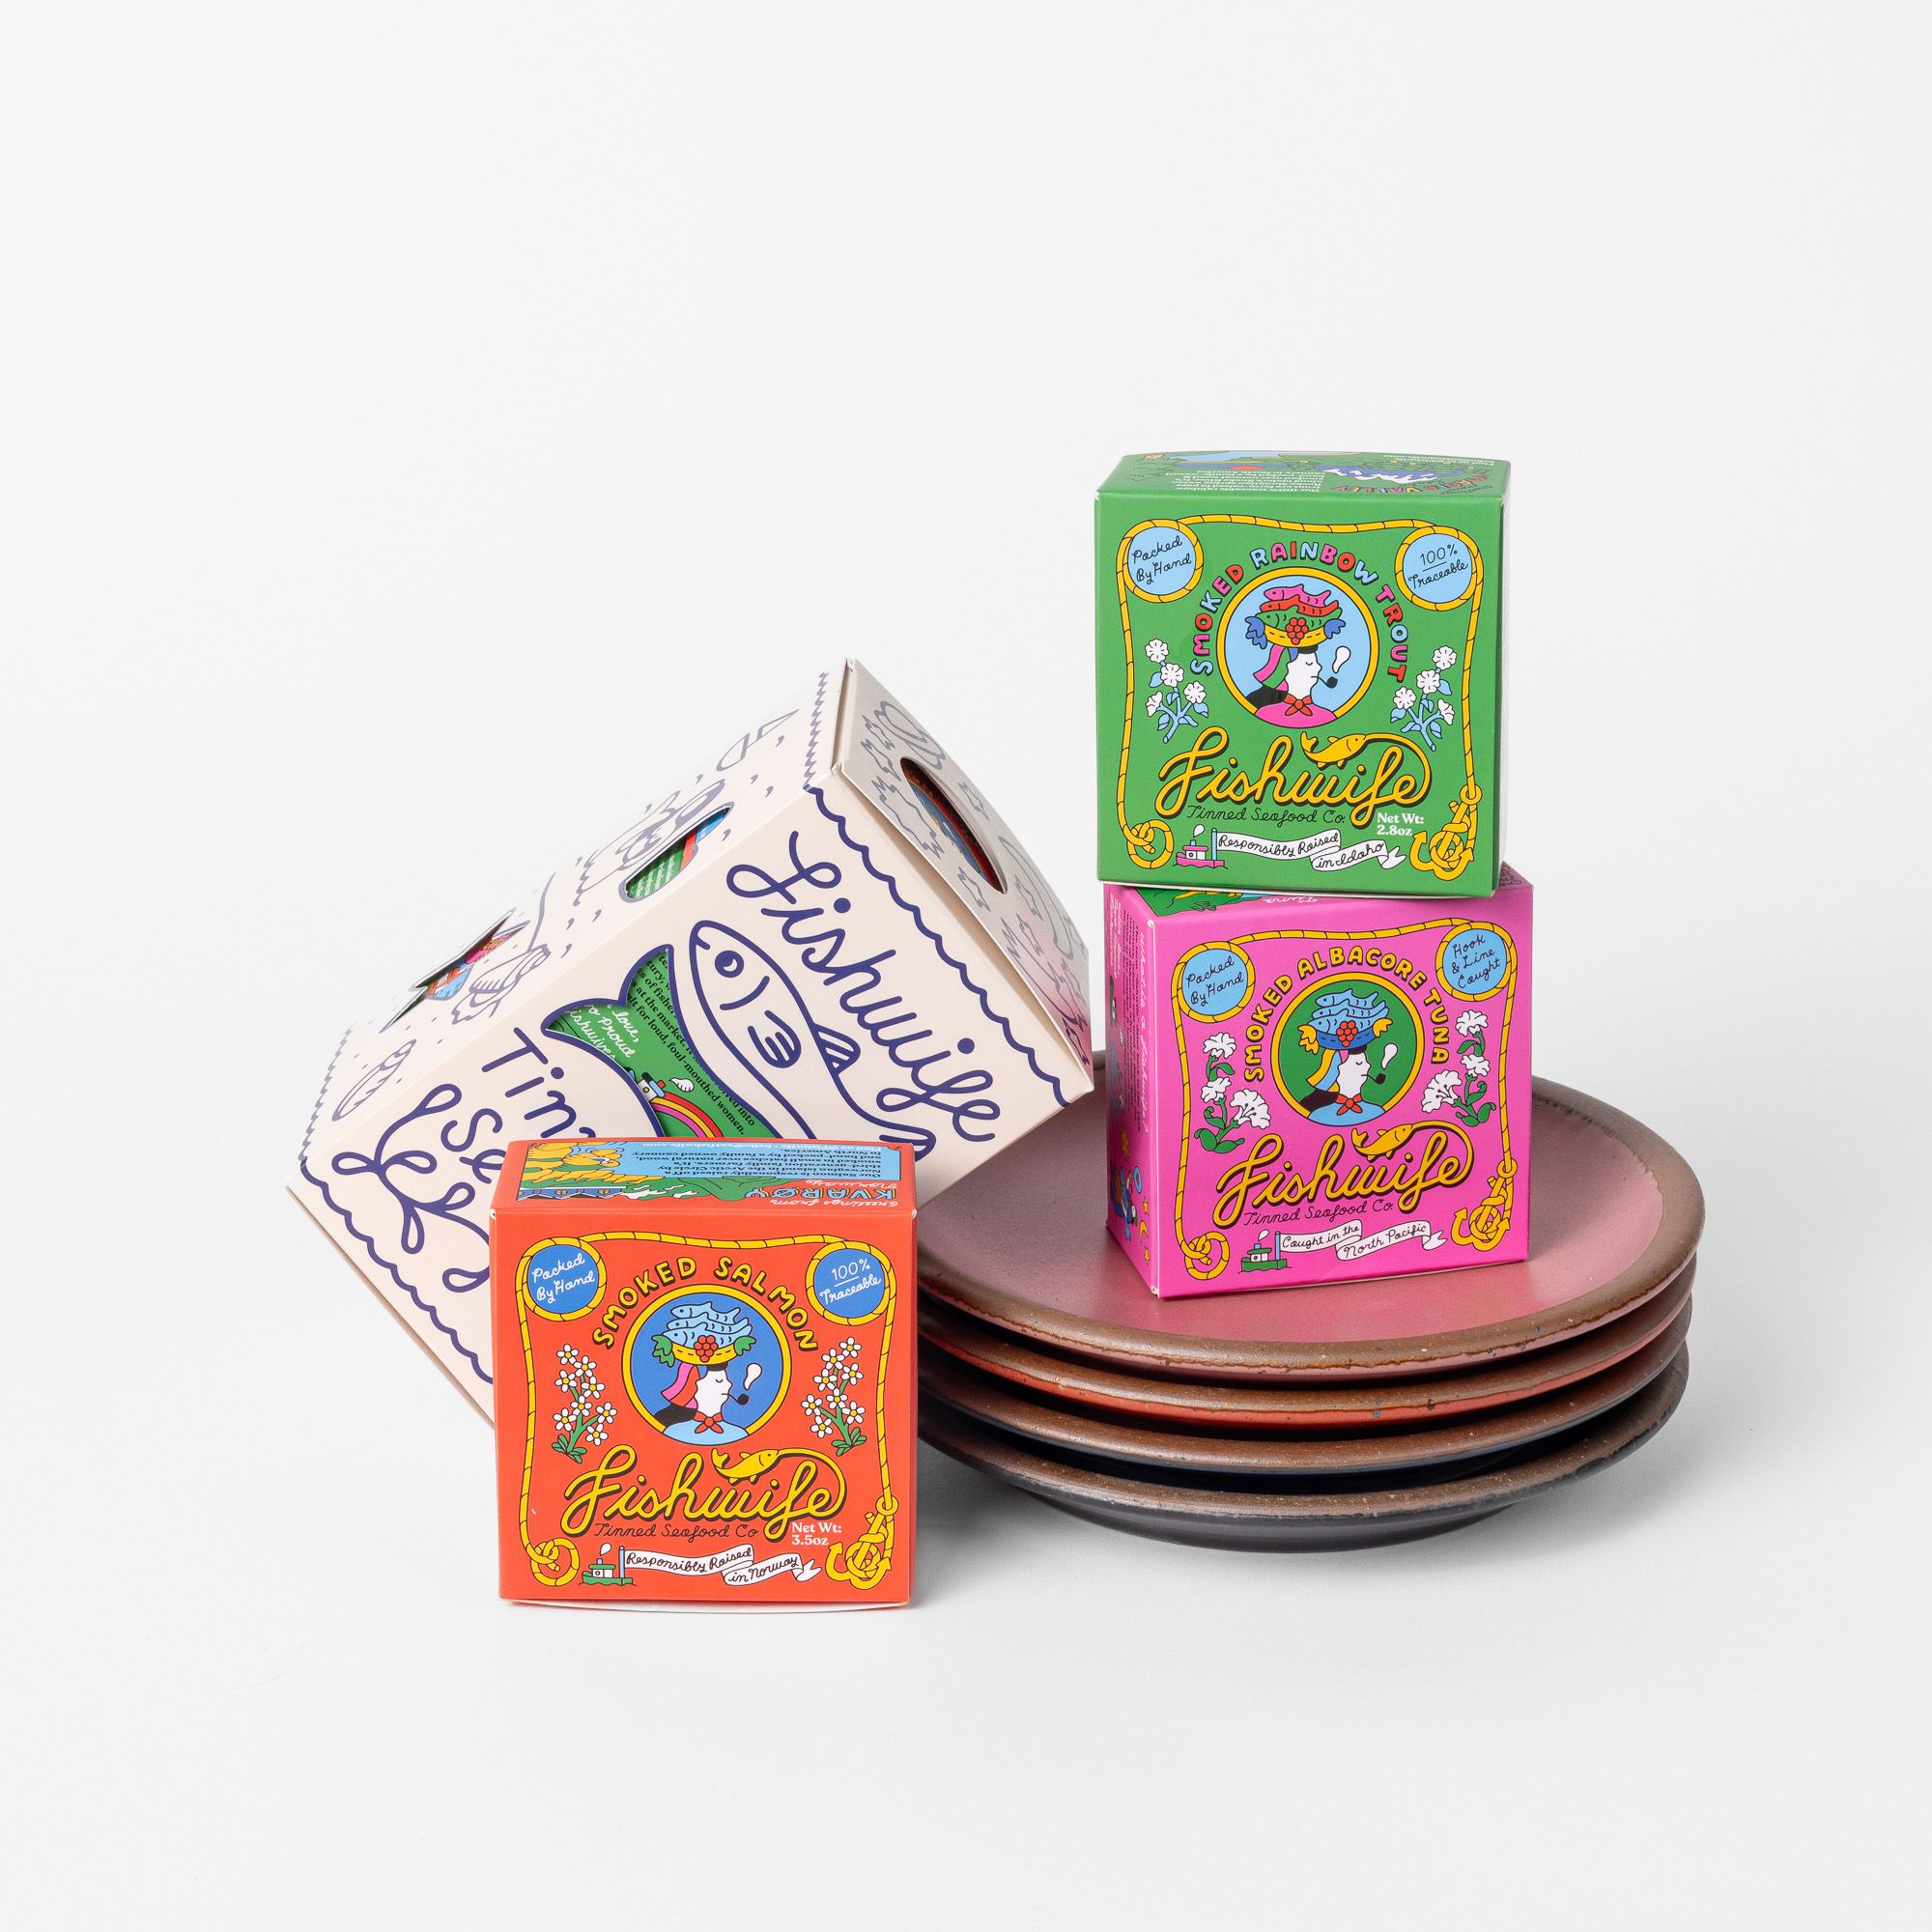 A stack of four ceramic plates with a stacked square boxes of tinned dish displayed on top. The boxes are illustrated in white, green, pink, and orange colors.